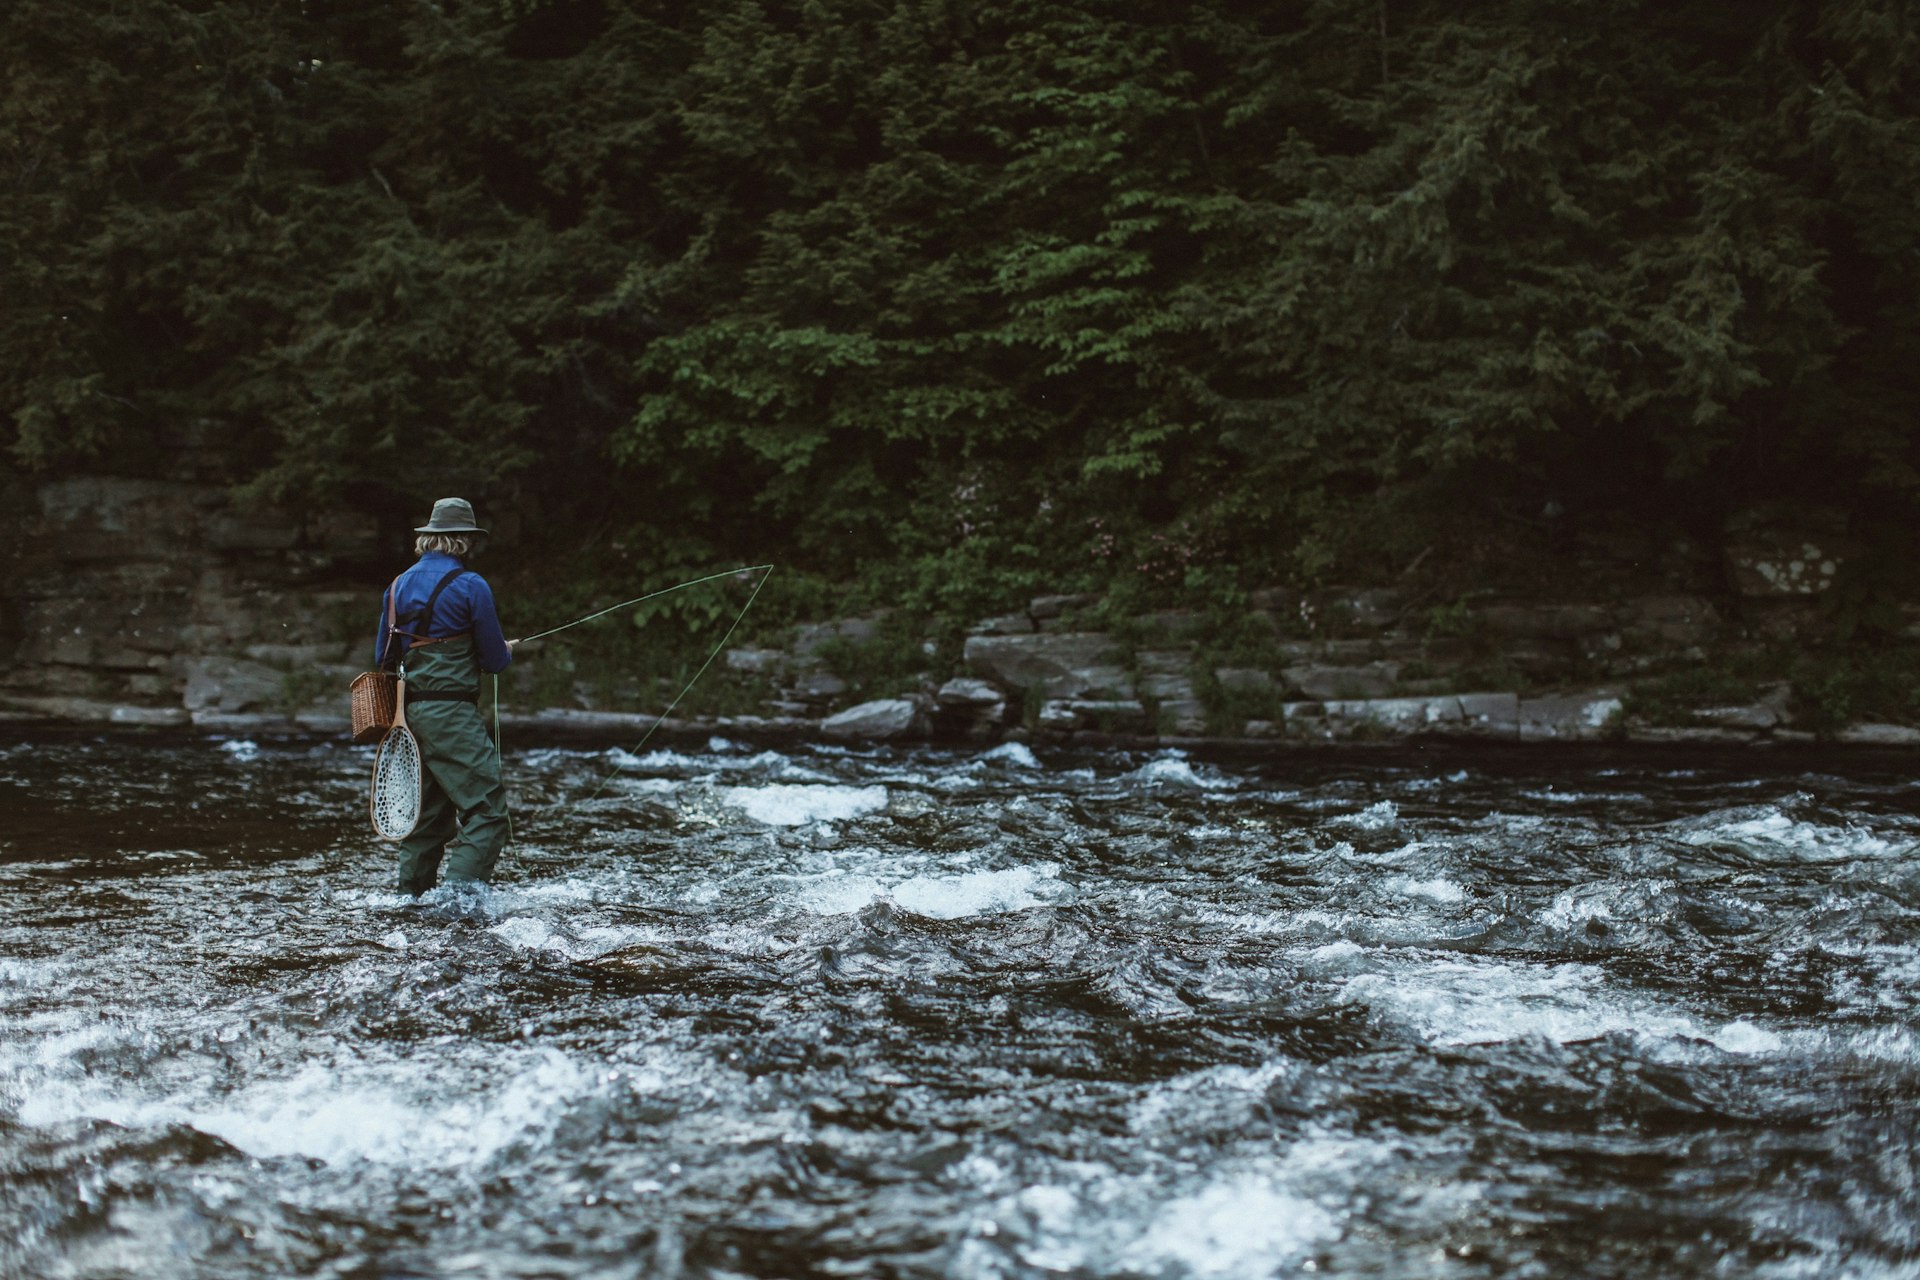 A man, wearing a cool hat and blue shirt, stands in the shallows of Beaverkill River, with rod in hand.